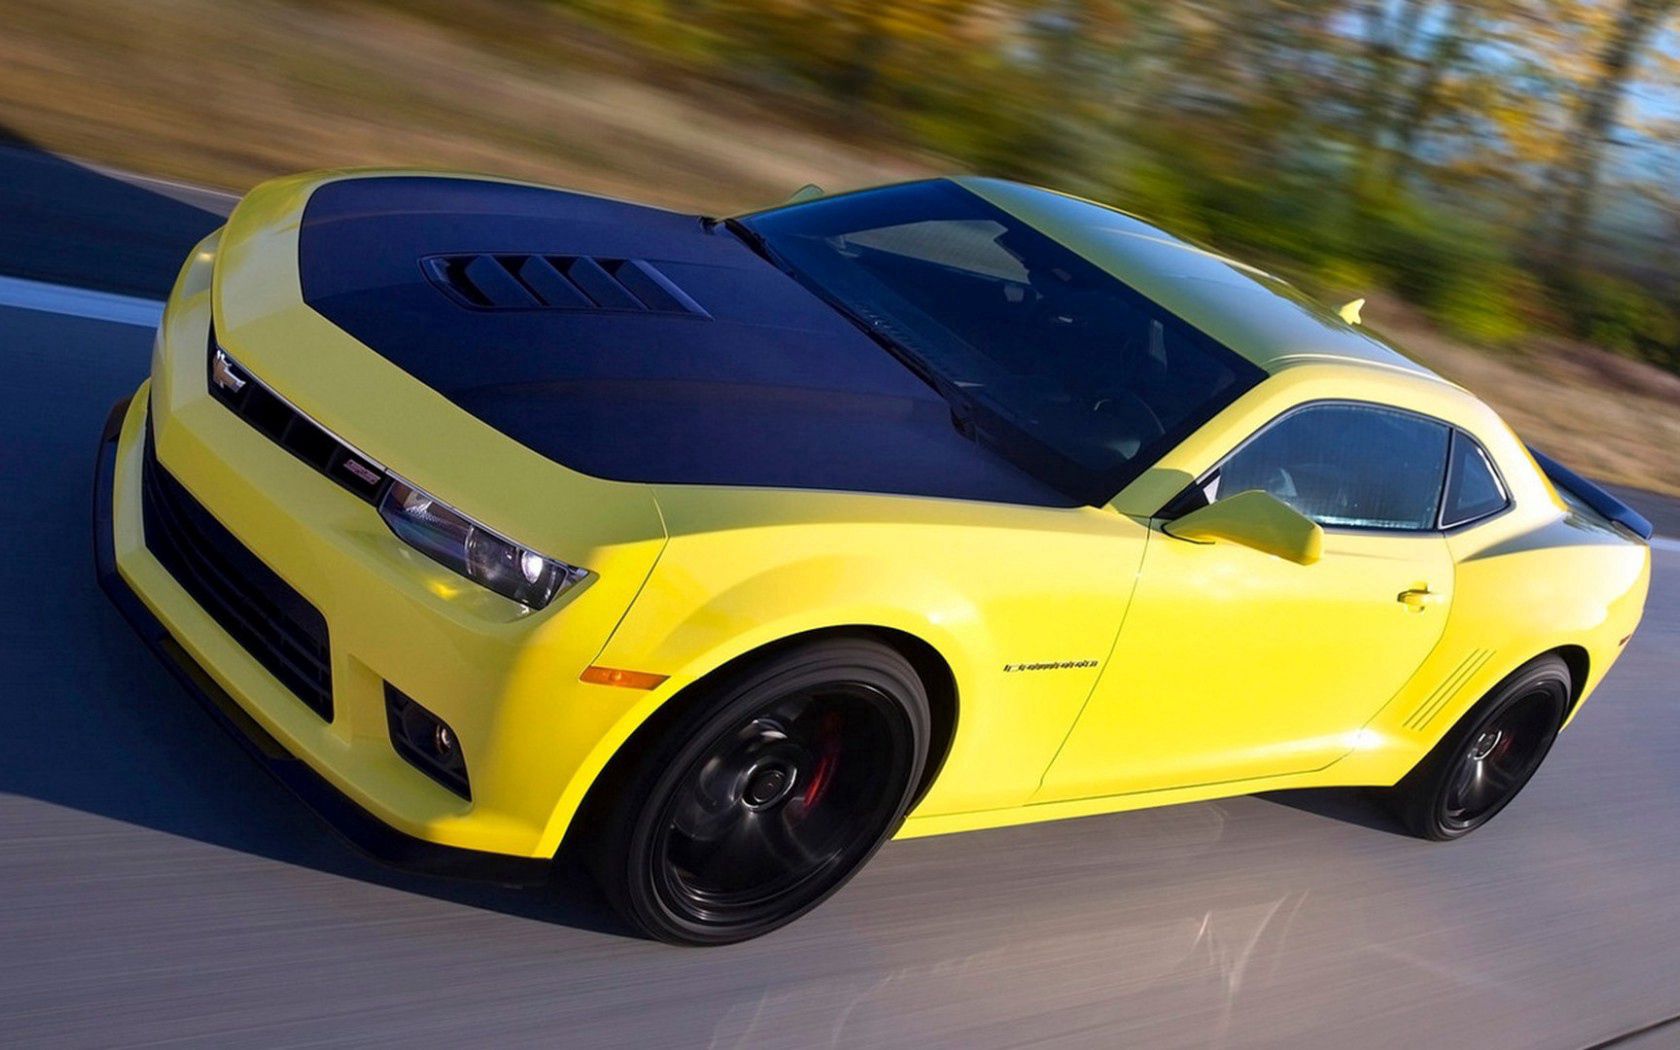 cars, chevrolet, yellow, traffic, movement, side view, camaro, 1le